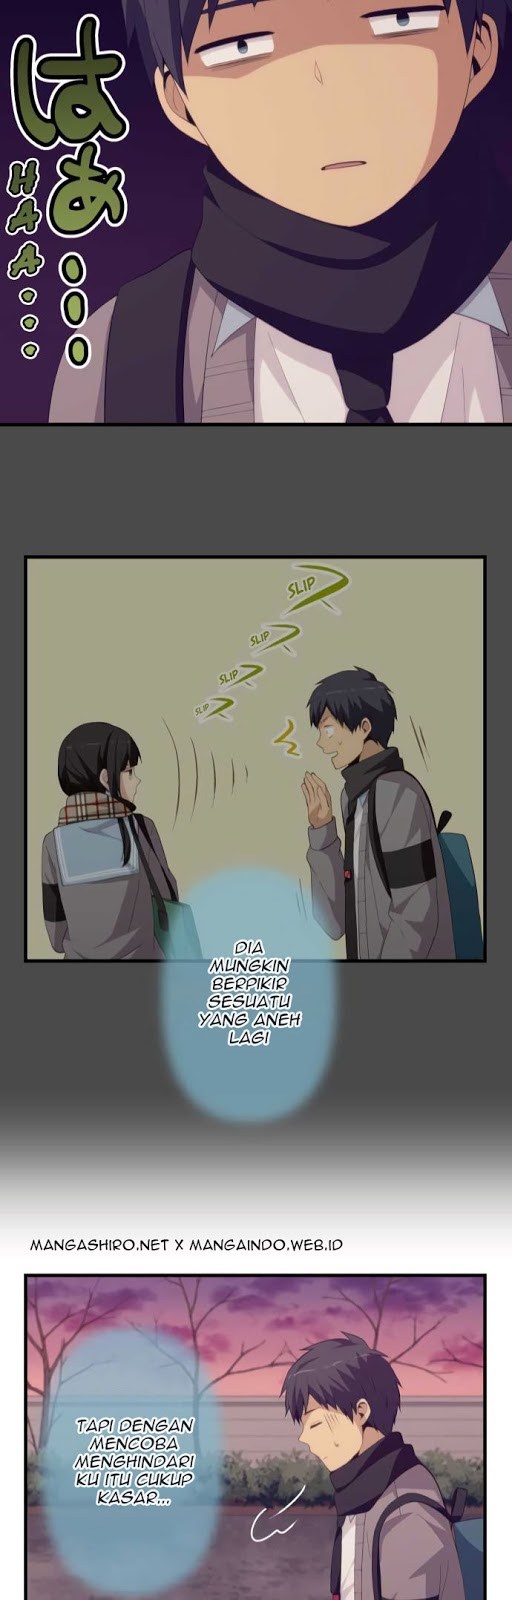 ReLIFE Chapter 191